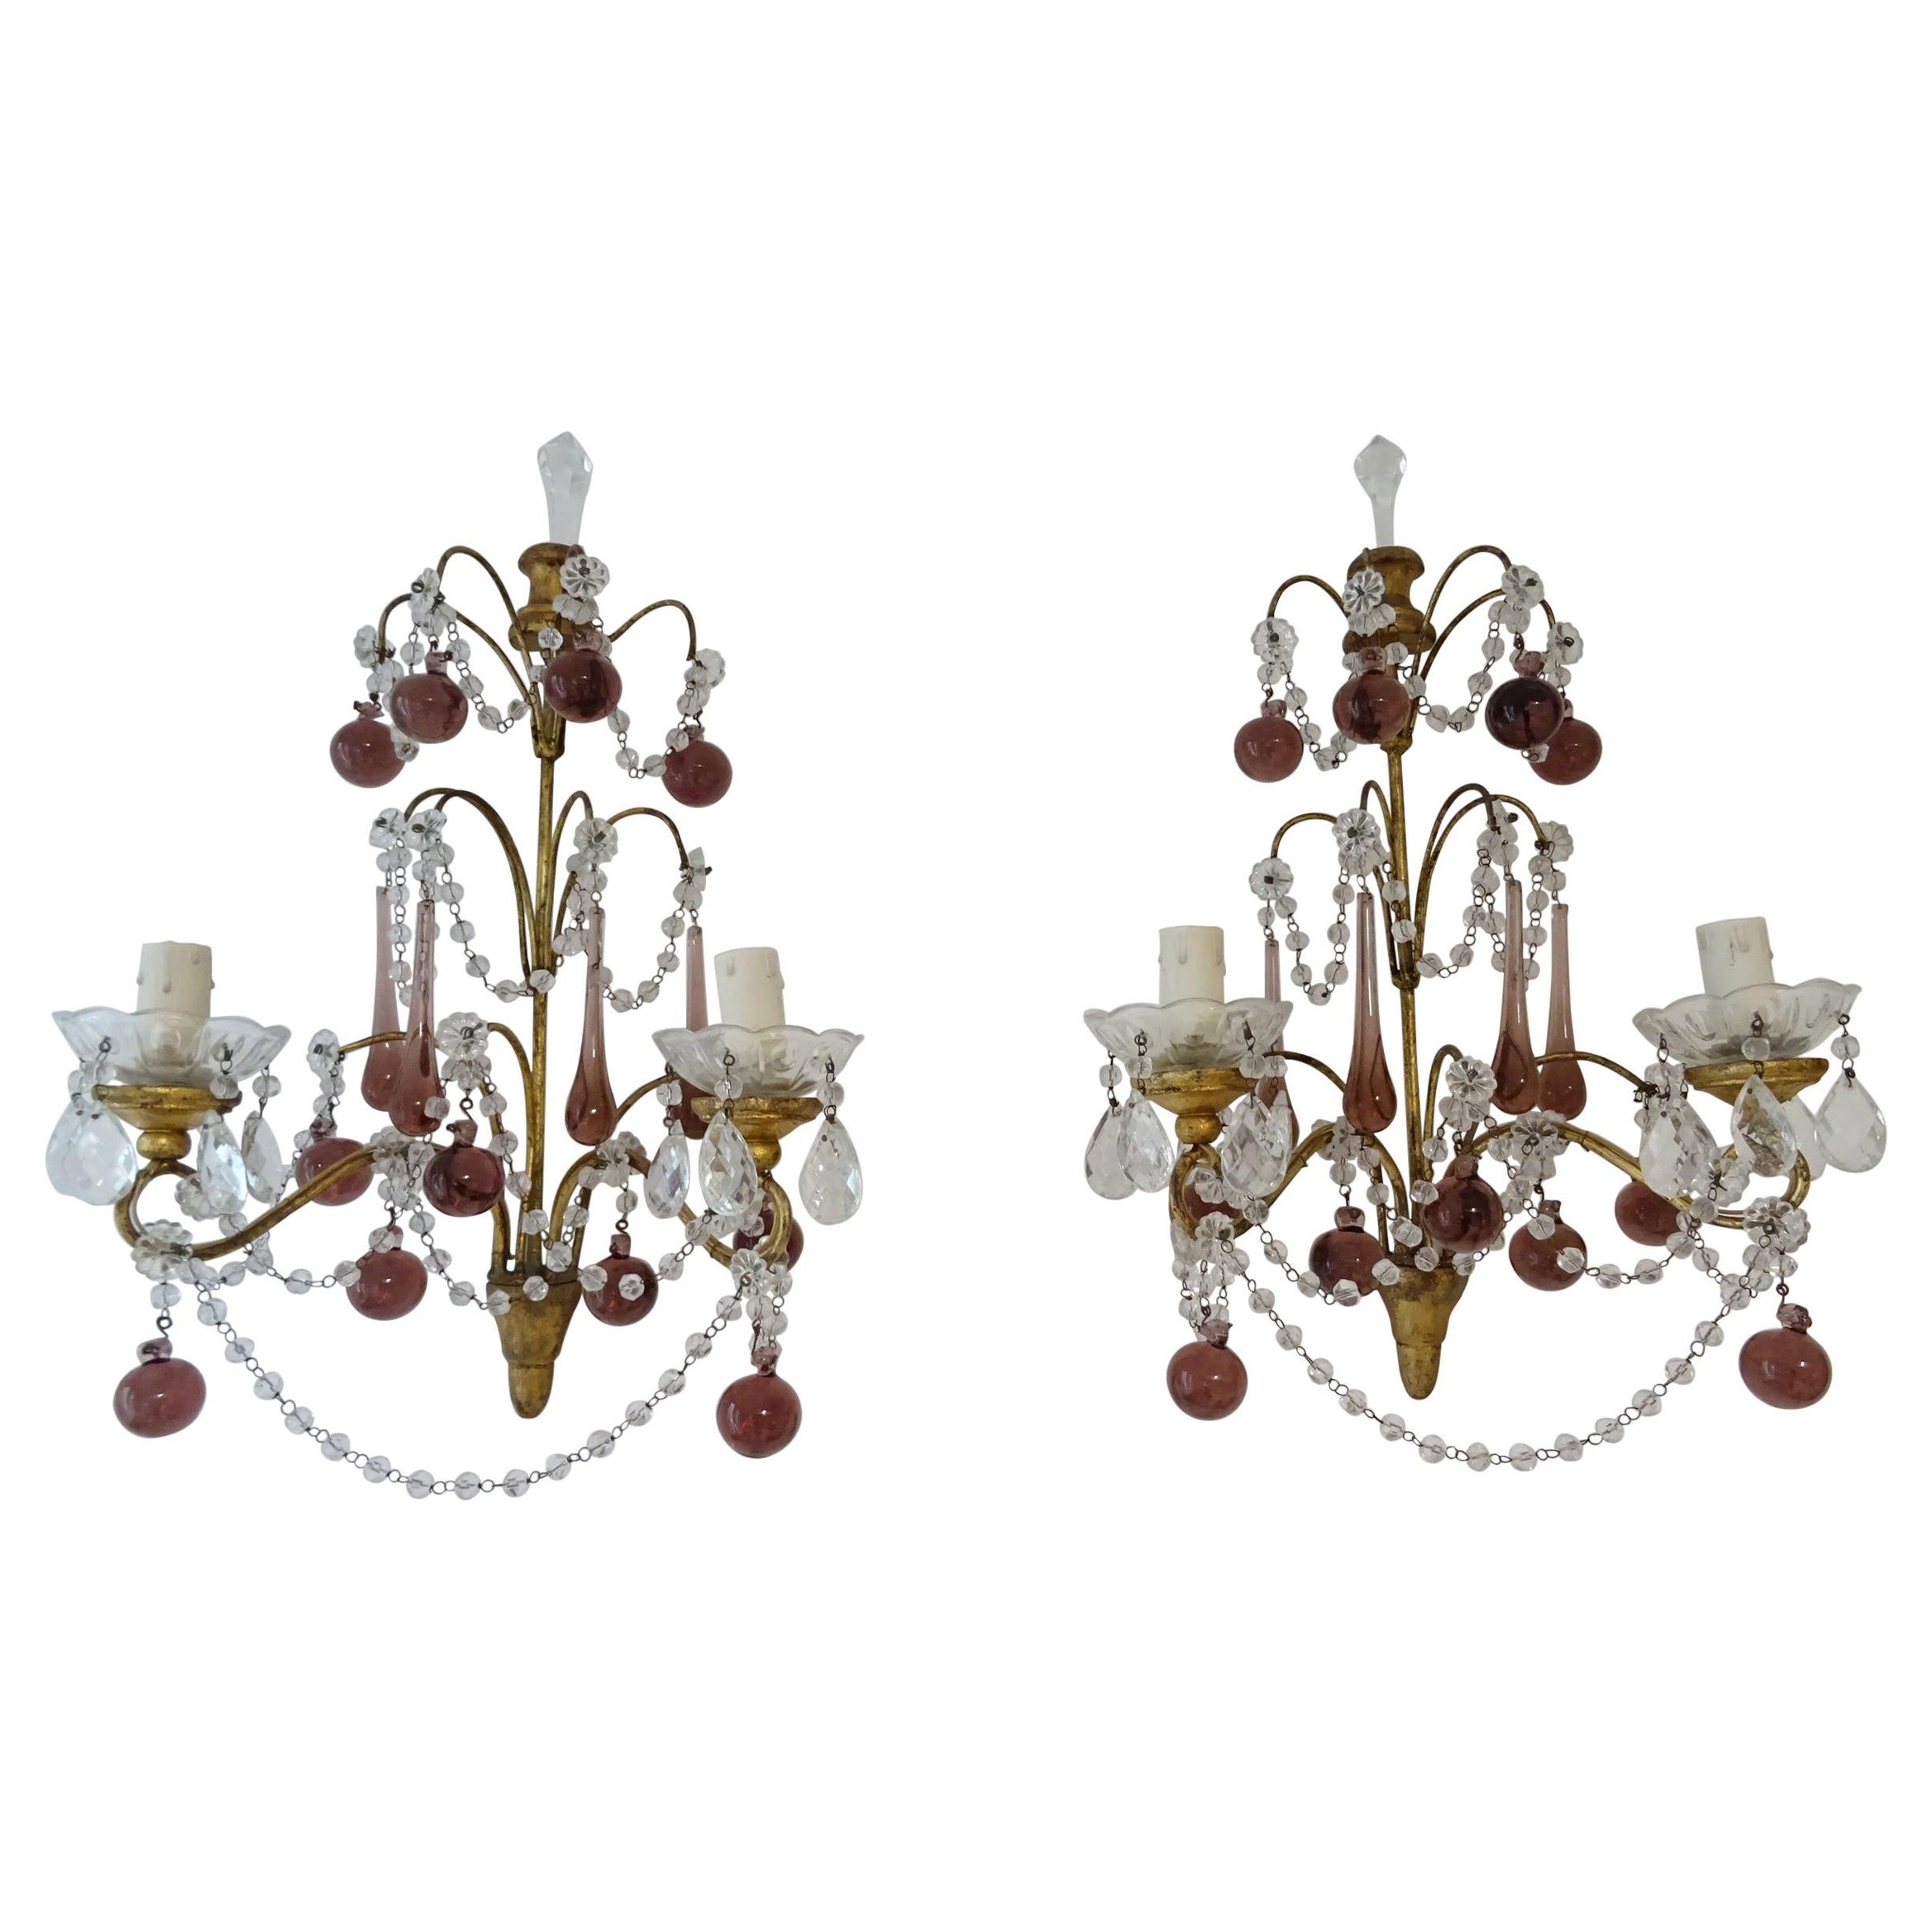 French Gilt Wood Crystal Amethyst Murano Drops 3 Tier with Spear Sconces c 1900 For Sale